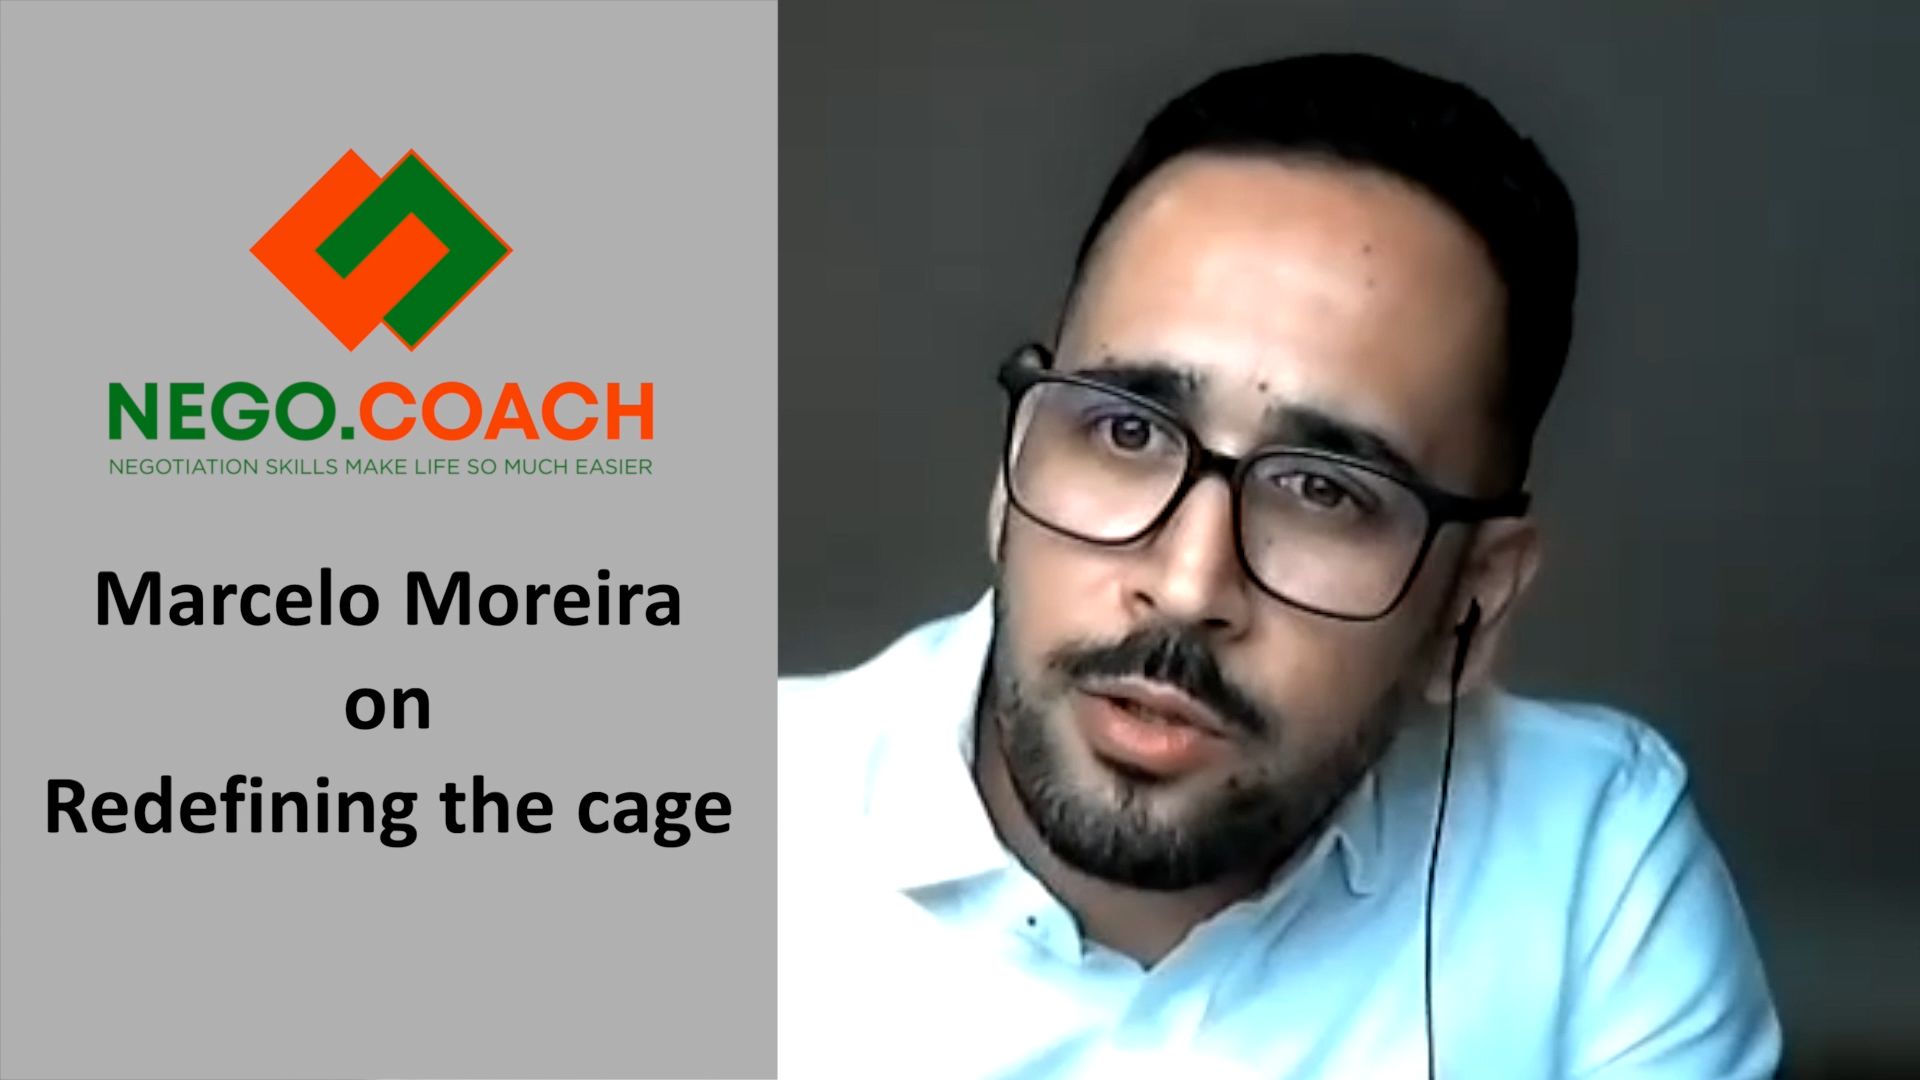 MARCELO MOREIRA ON REDEFINING THE CAGE